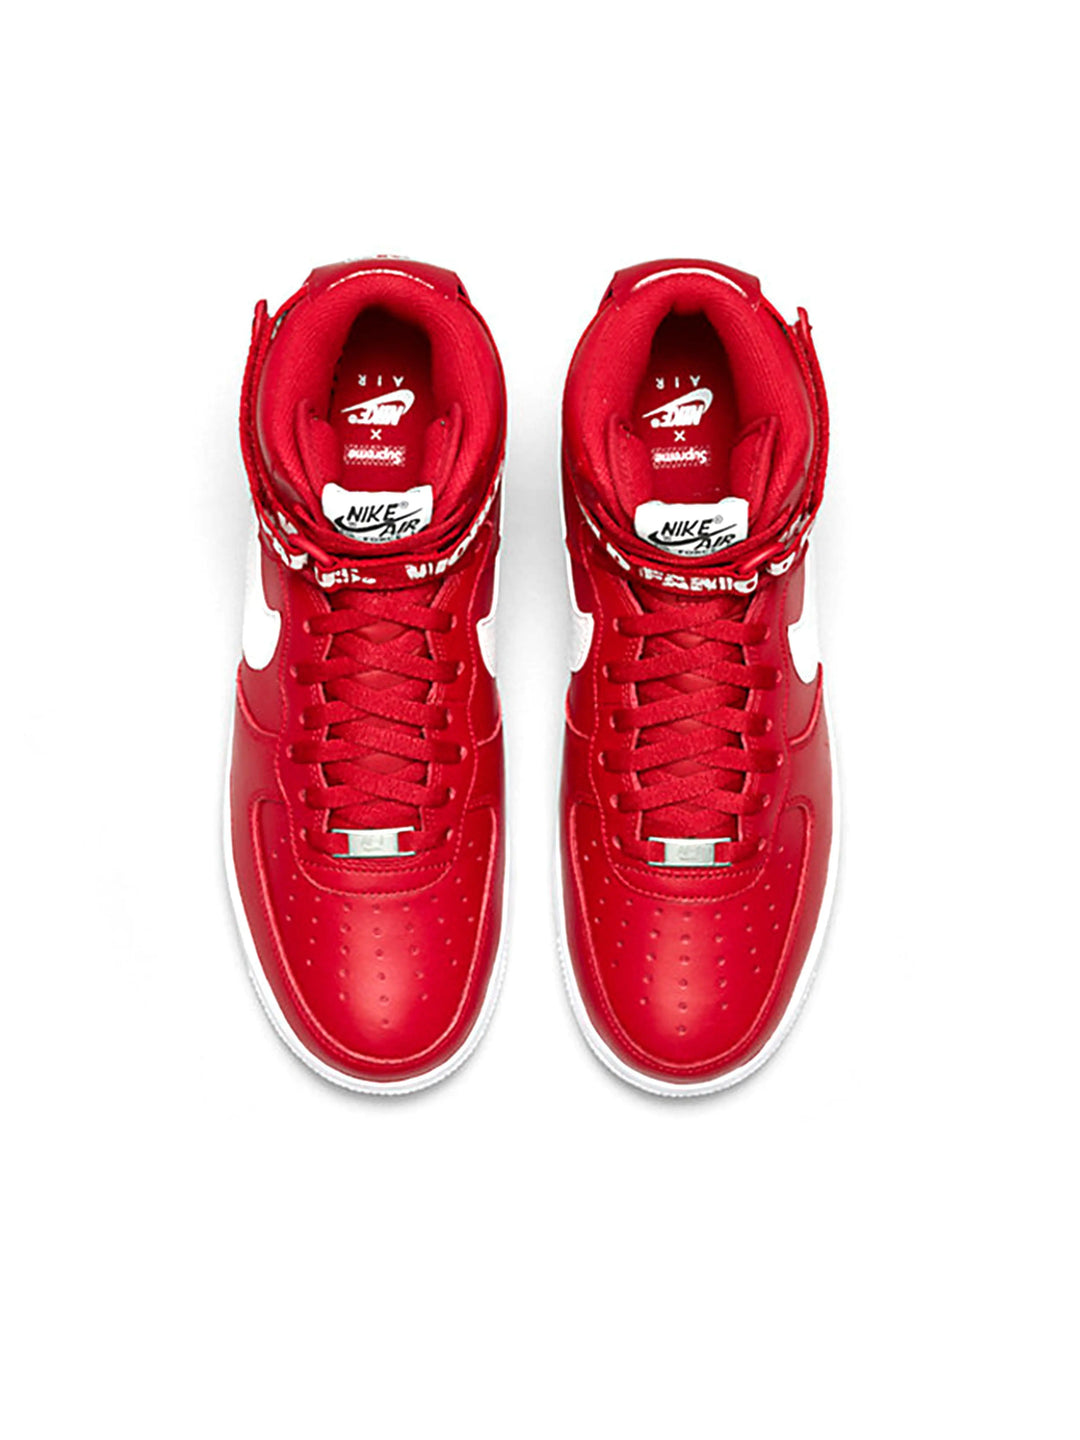 Nike Air Force 1 High Supreme World Famous Red Prior